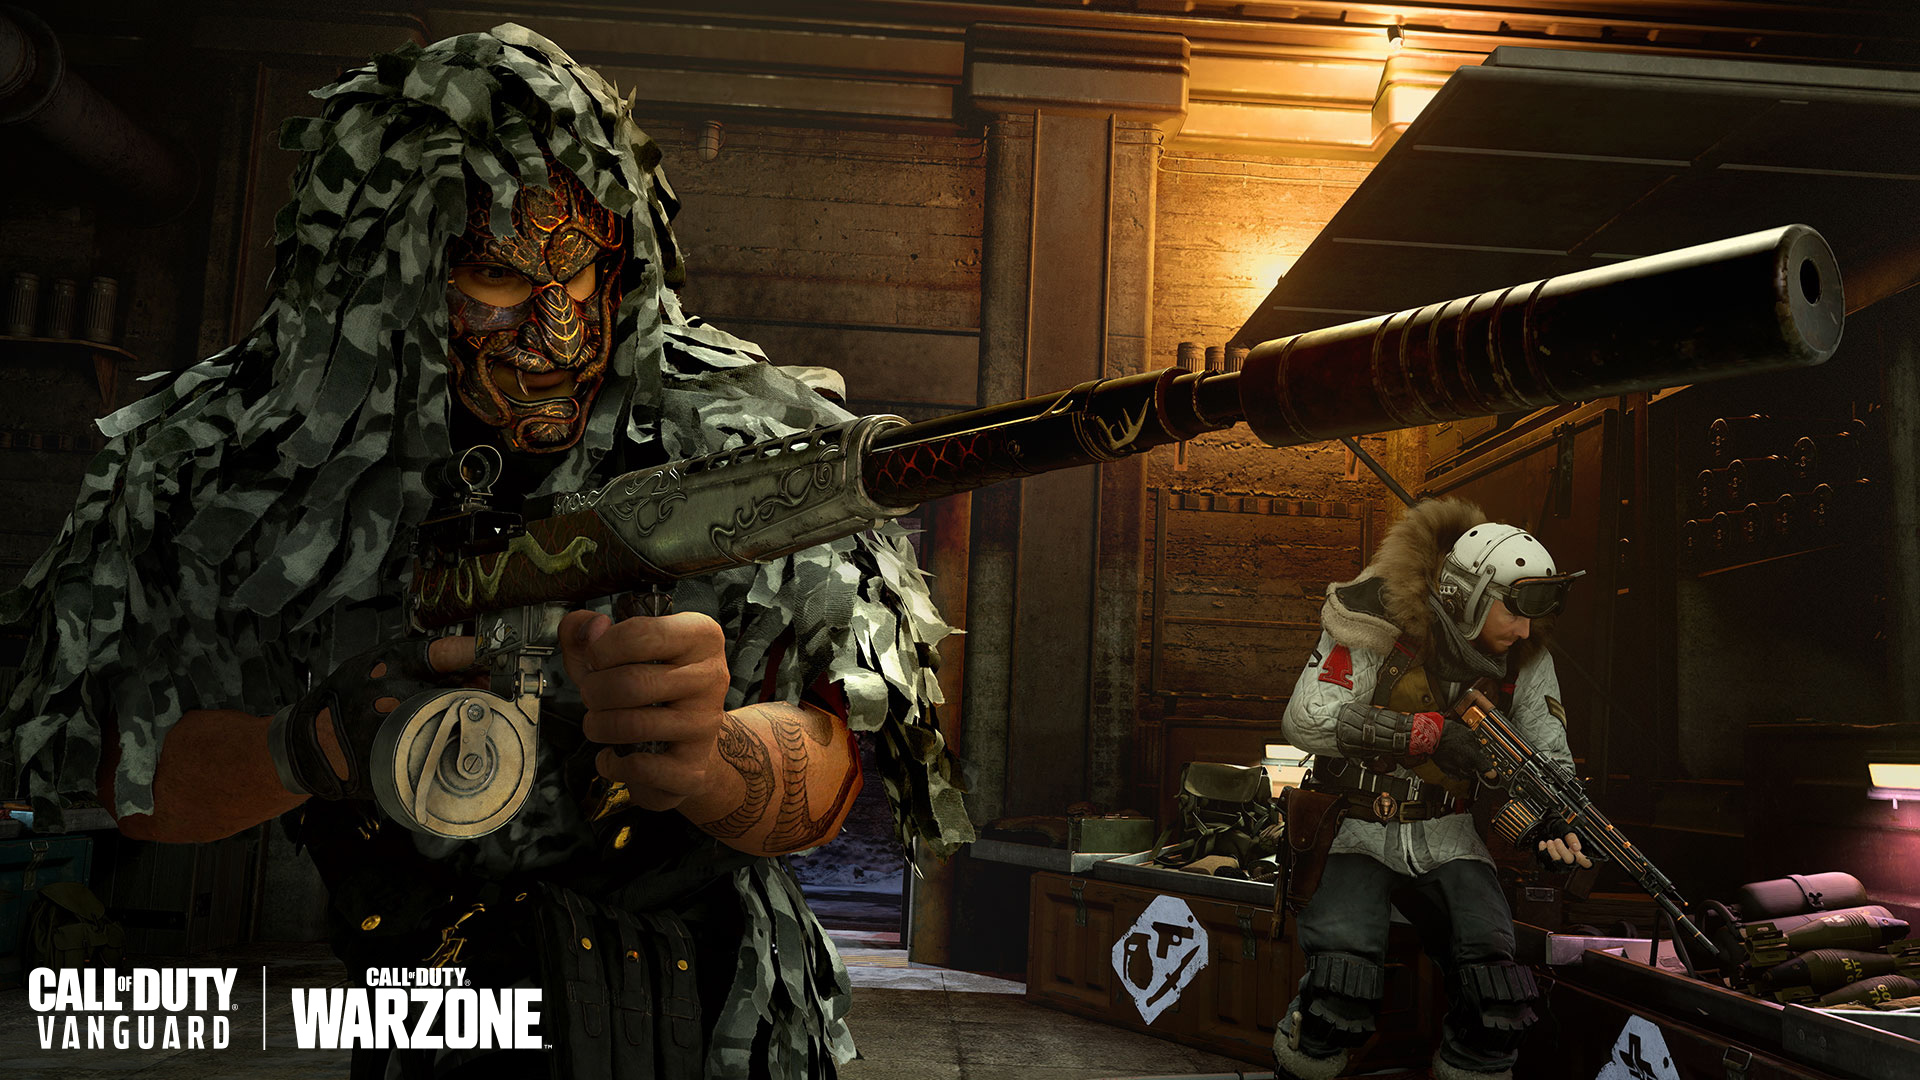 Rebirth Island is officially returning in Call of Duty: Warzone